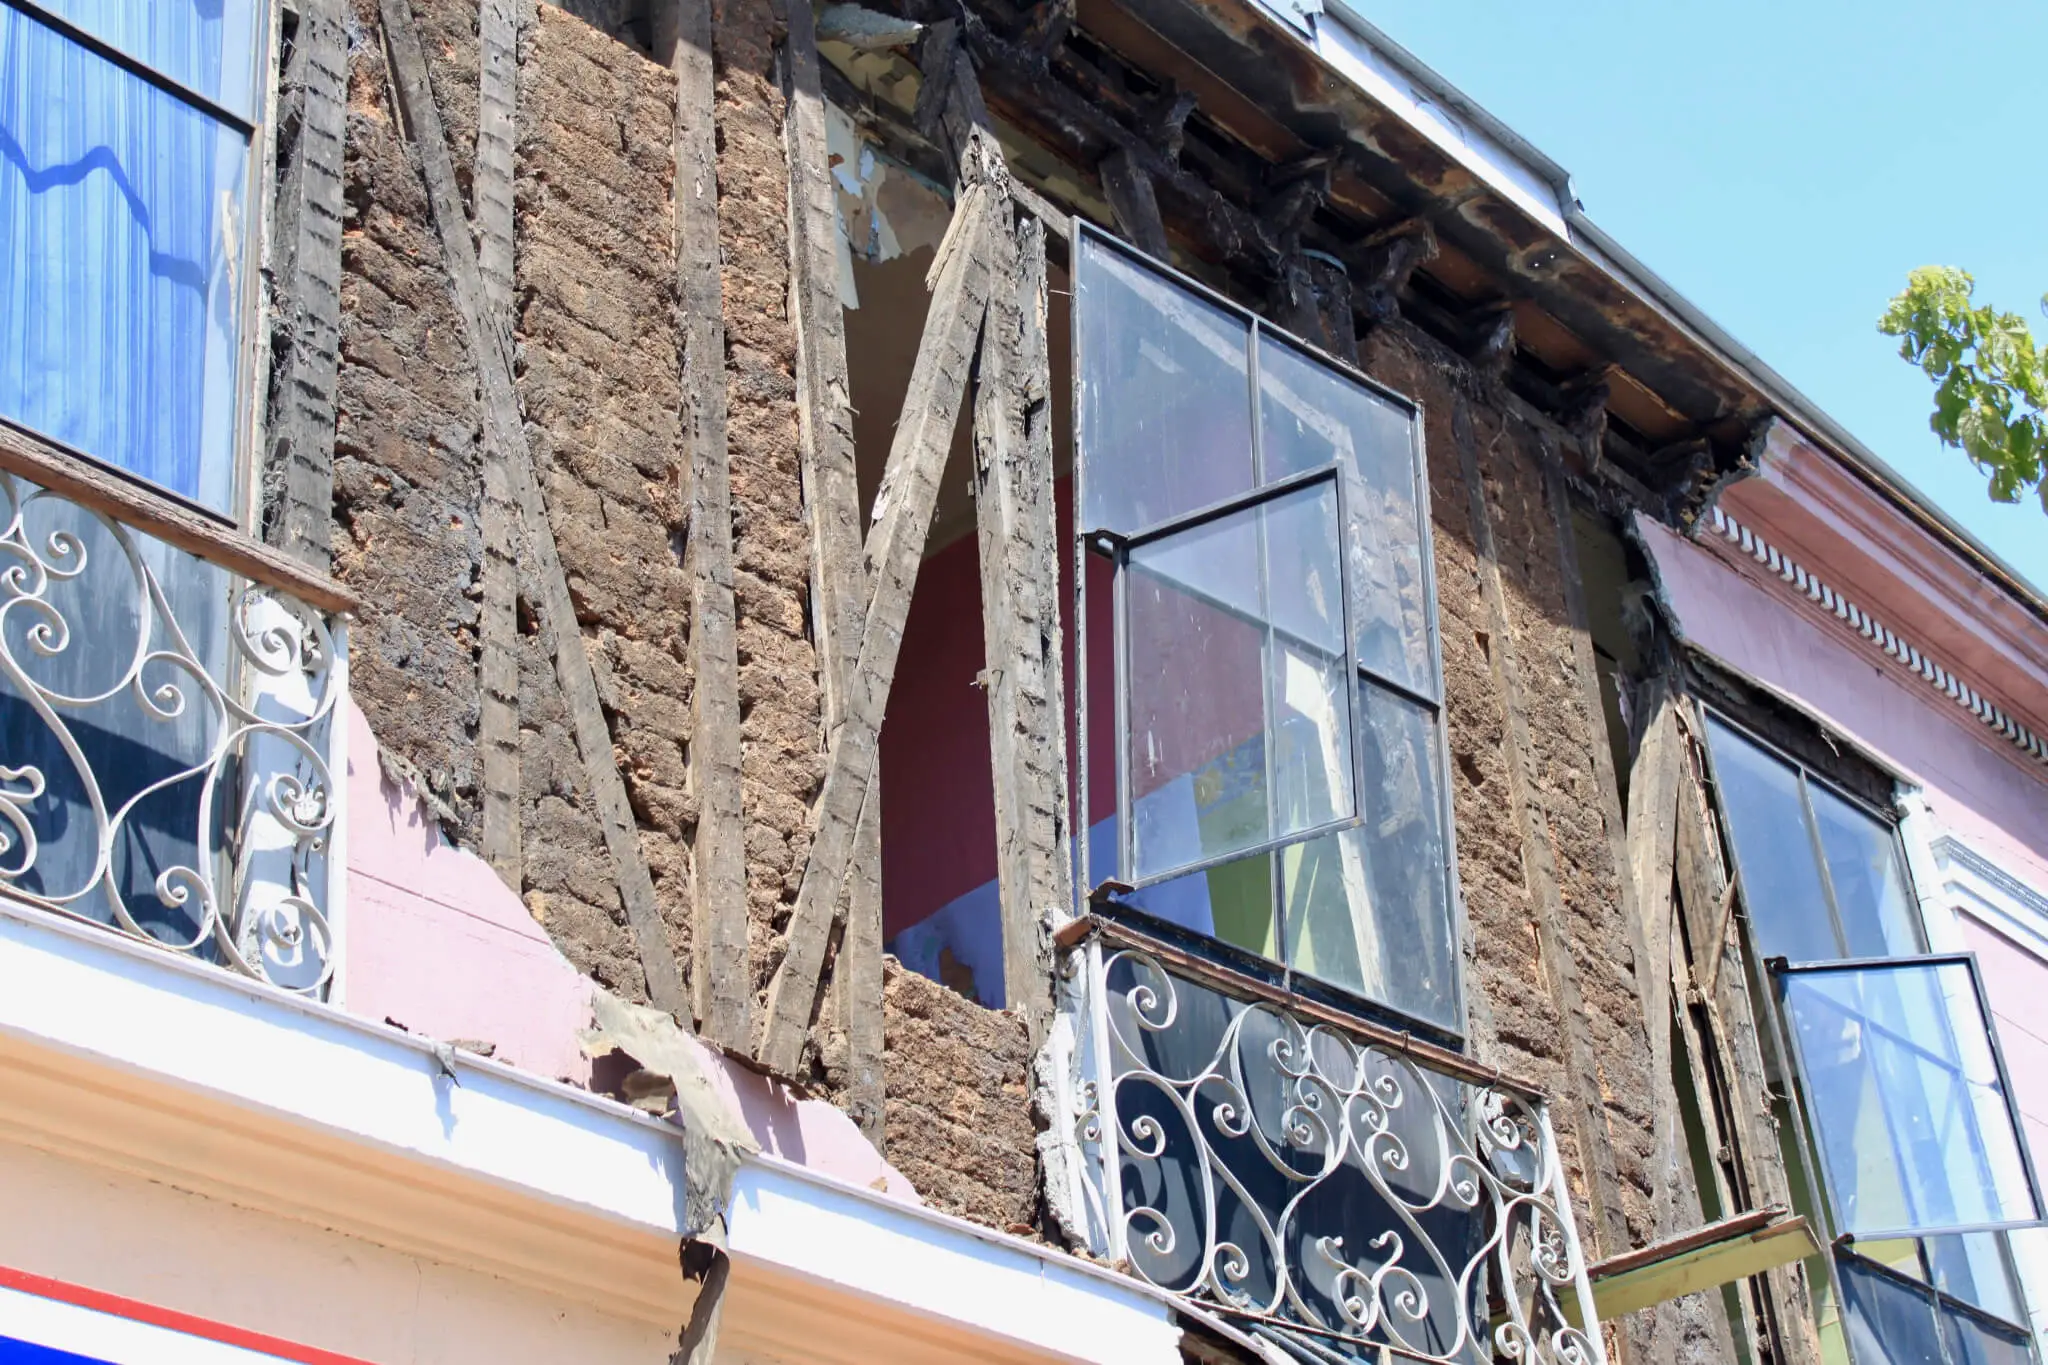 Broken window and brick building missing plaster after earthquake